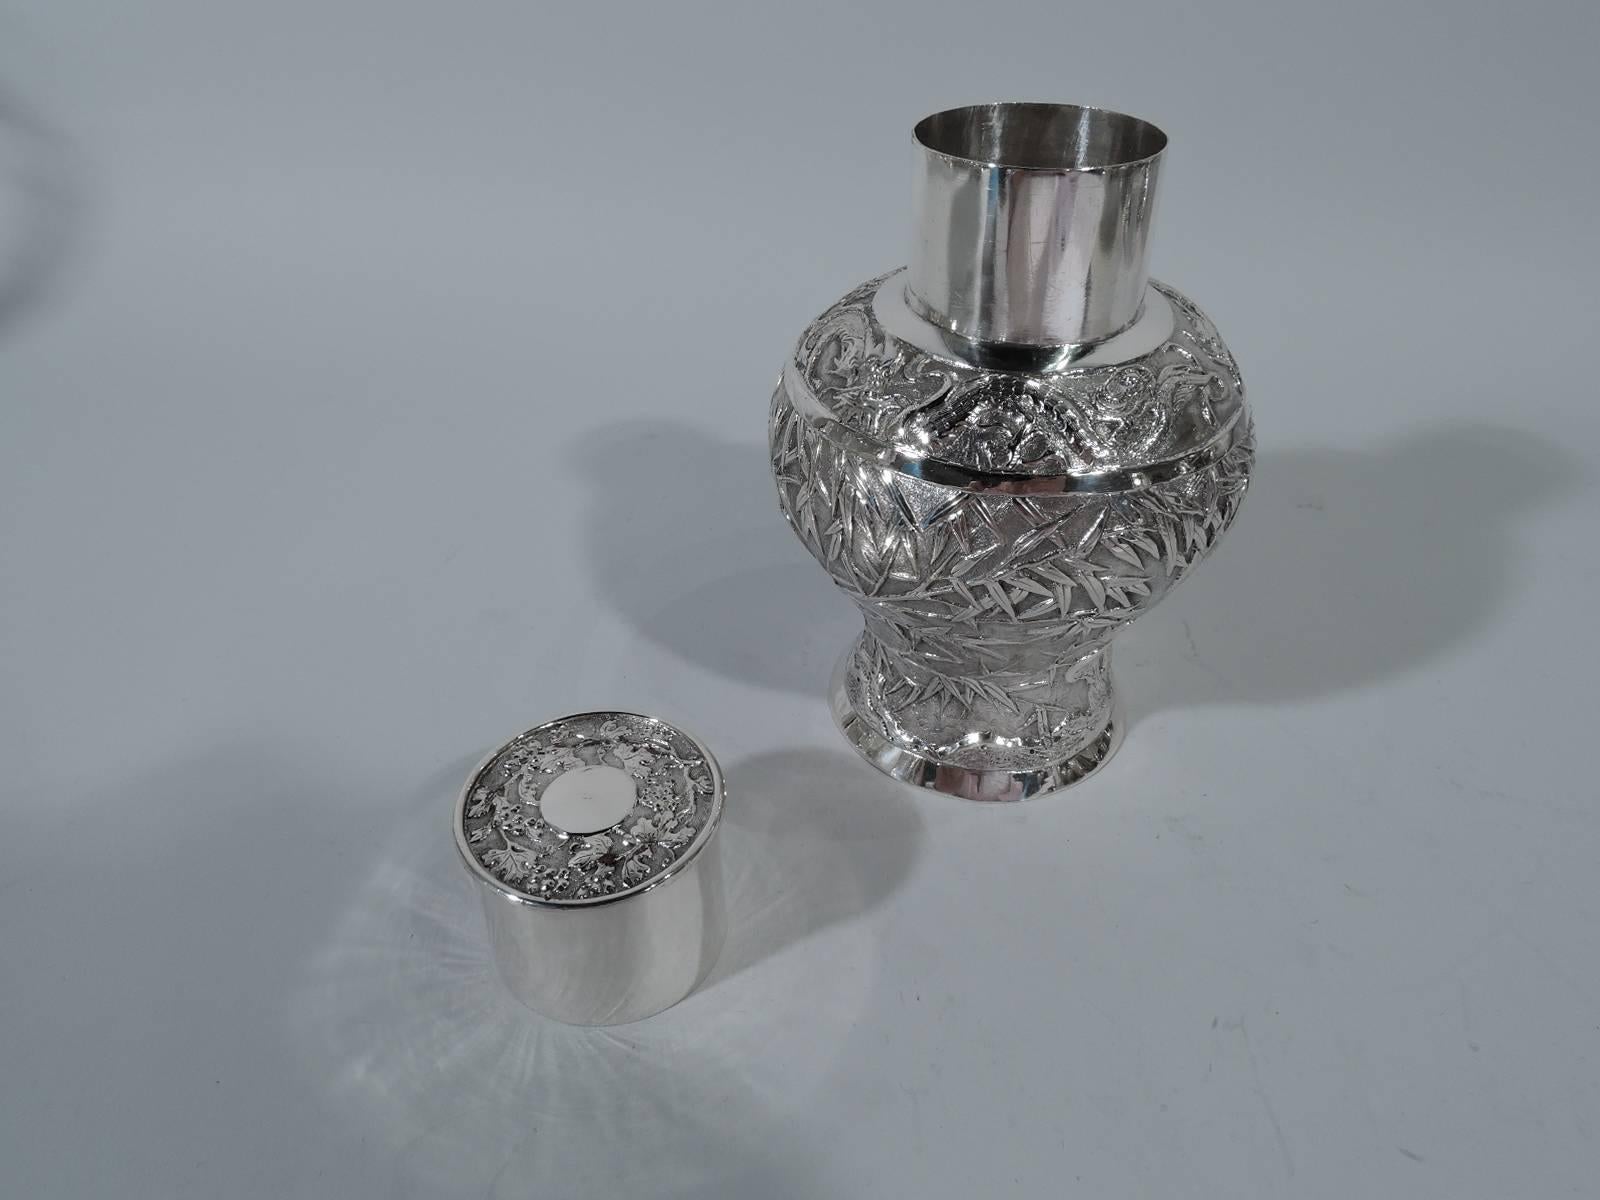 Antique Chinese Silver Bamboo Tea Caddy by Hung Chong In Excellent Condition For Sale In New York, NY